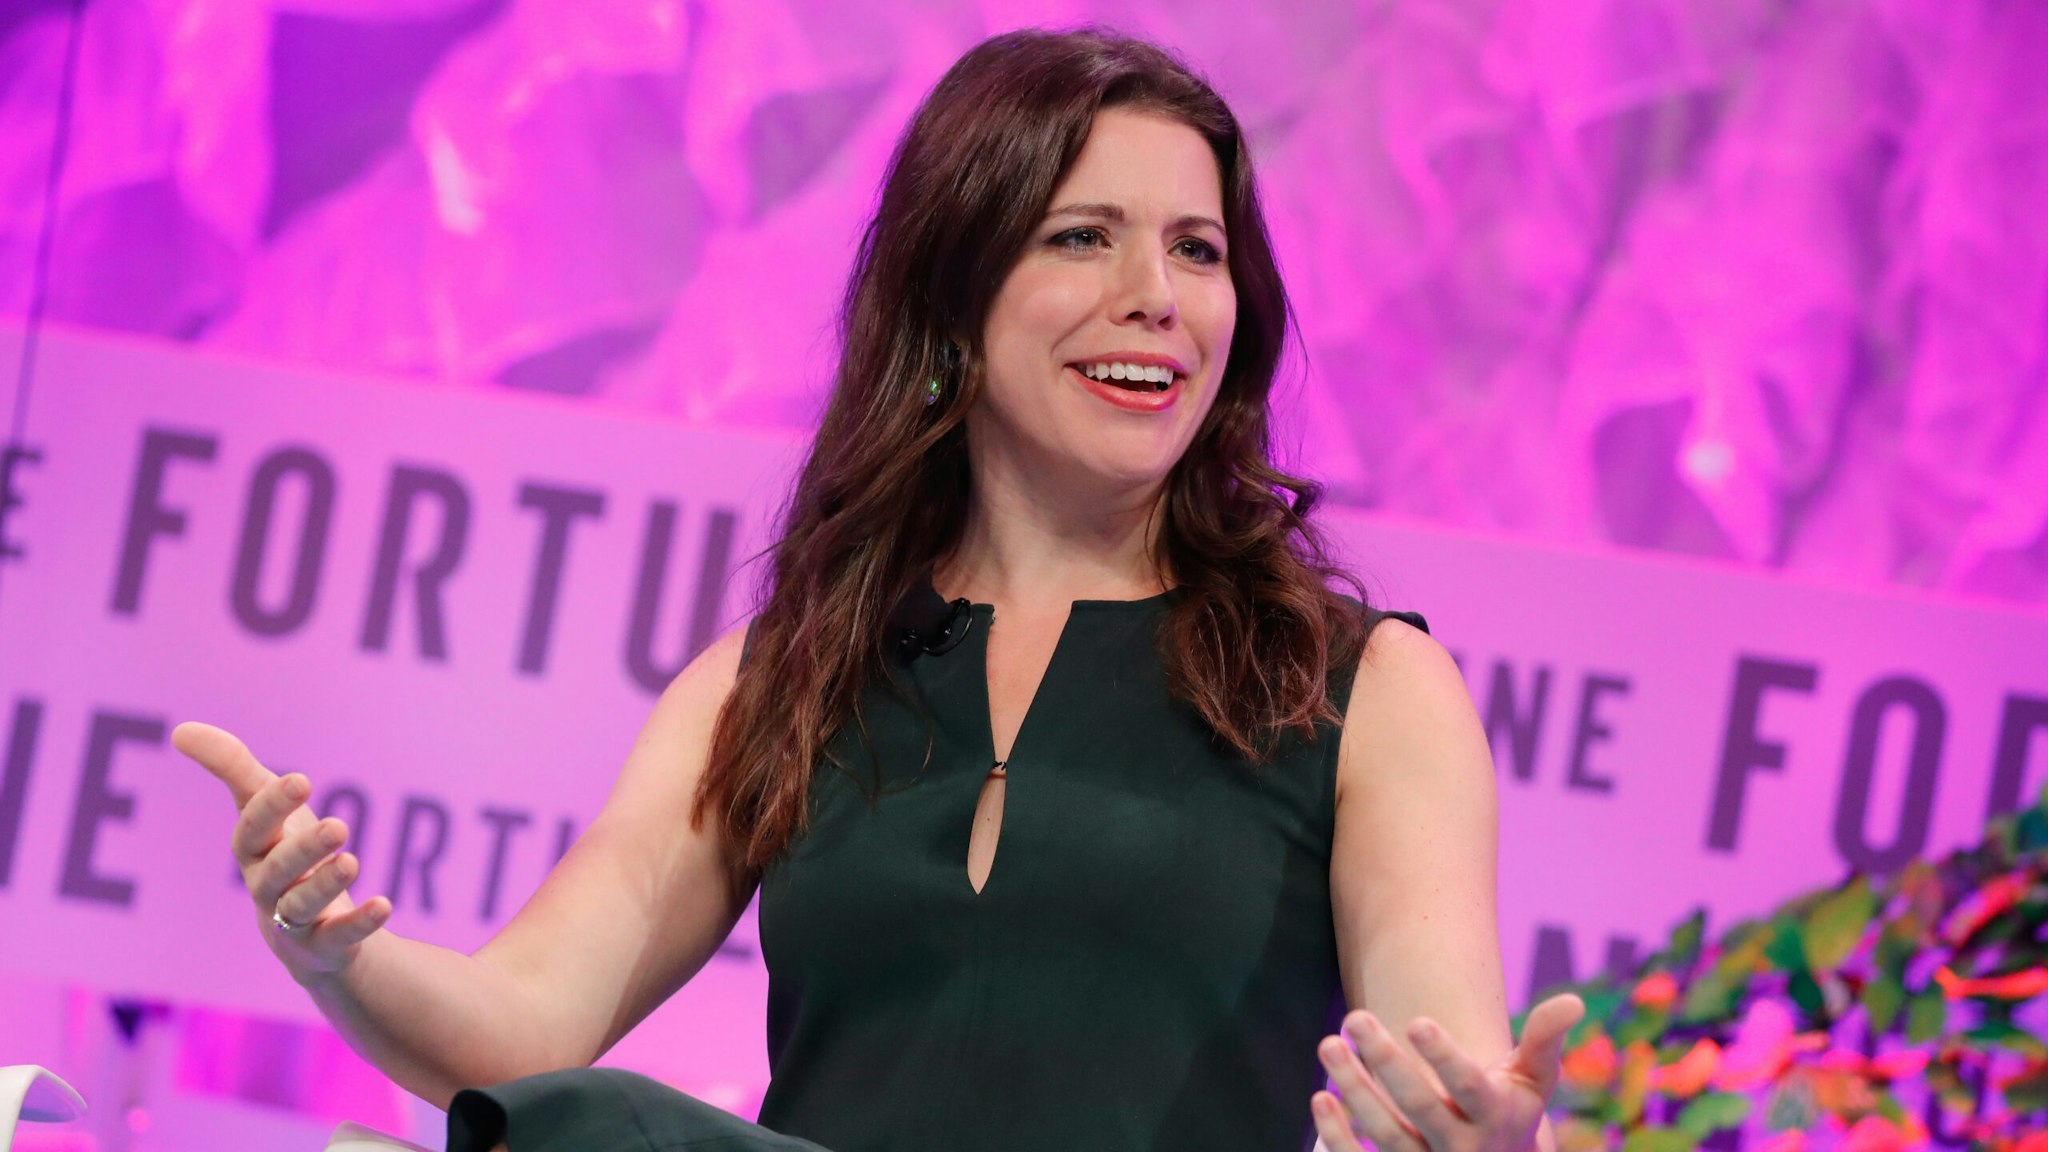 WASHINGTON, DC - OCTOBER 11: CNN Political Commentator Mary Katharine Ham speaks onstage at the Fortune Most Powerful Women Summit - Day 3 on October 11, 2017 in Washington, DC.